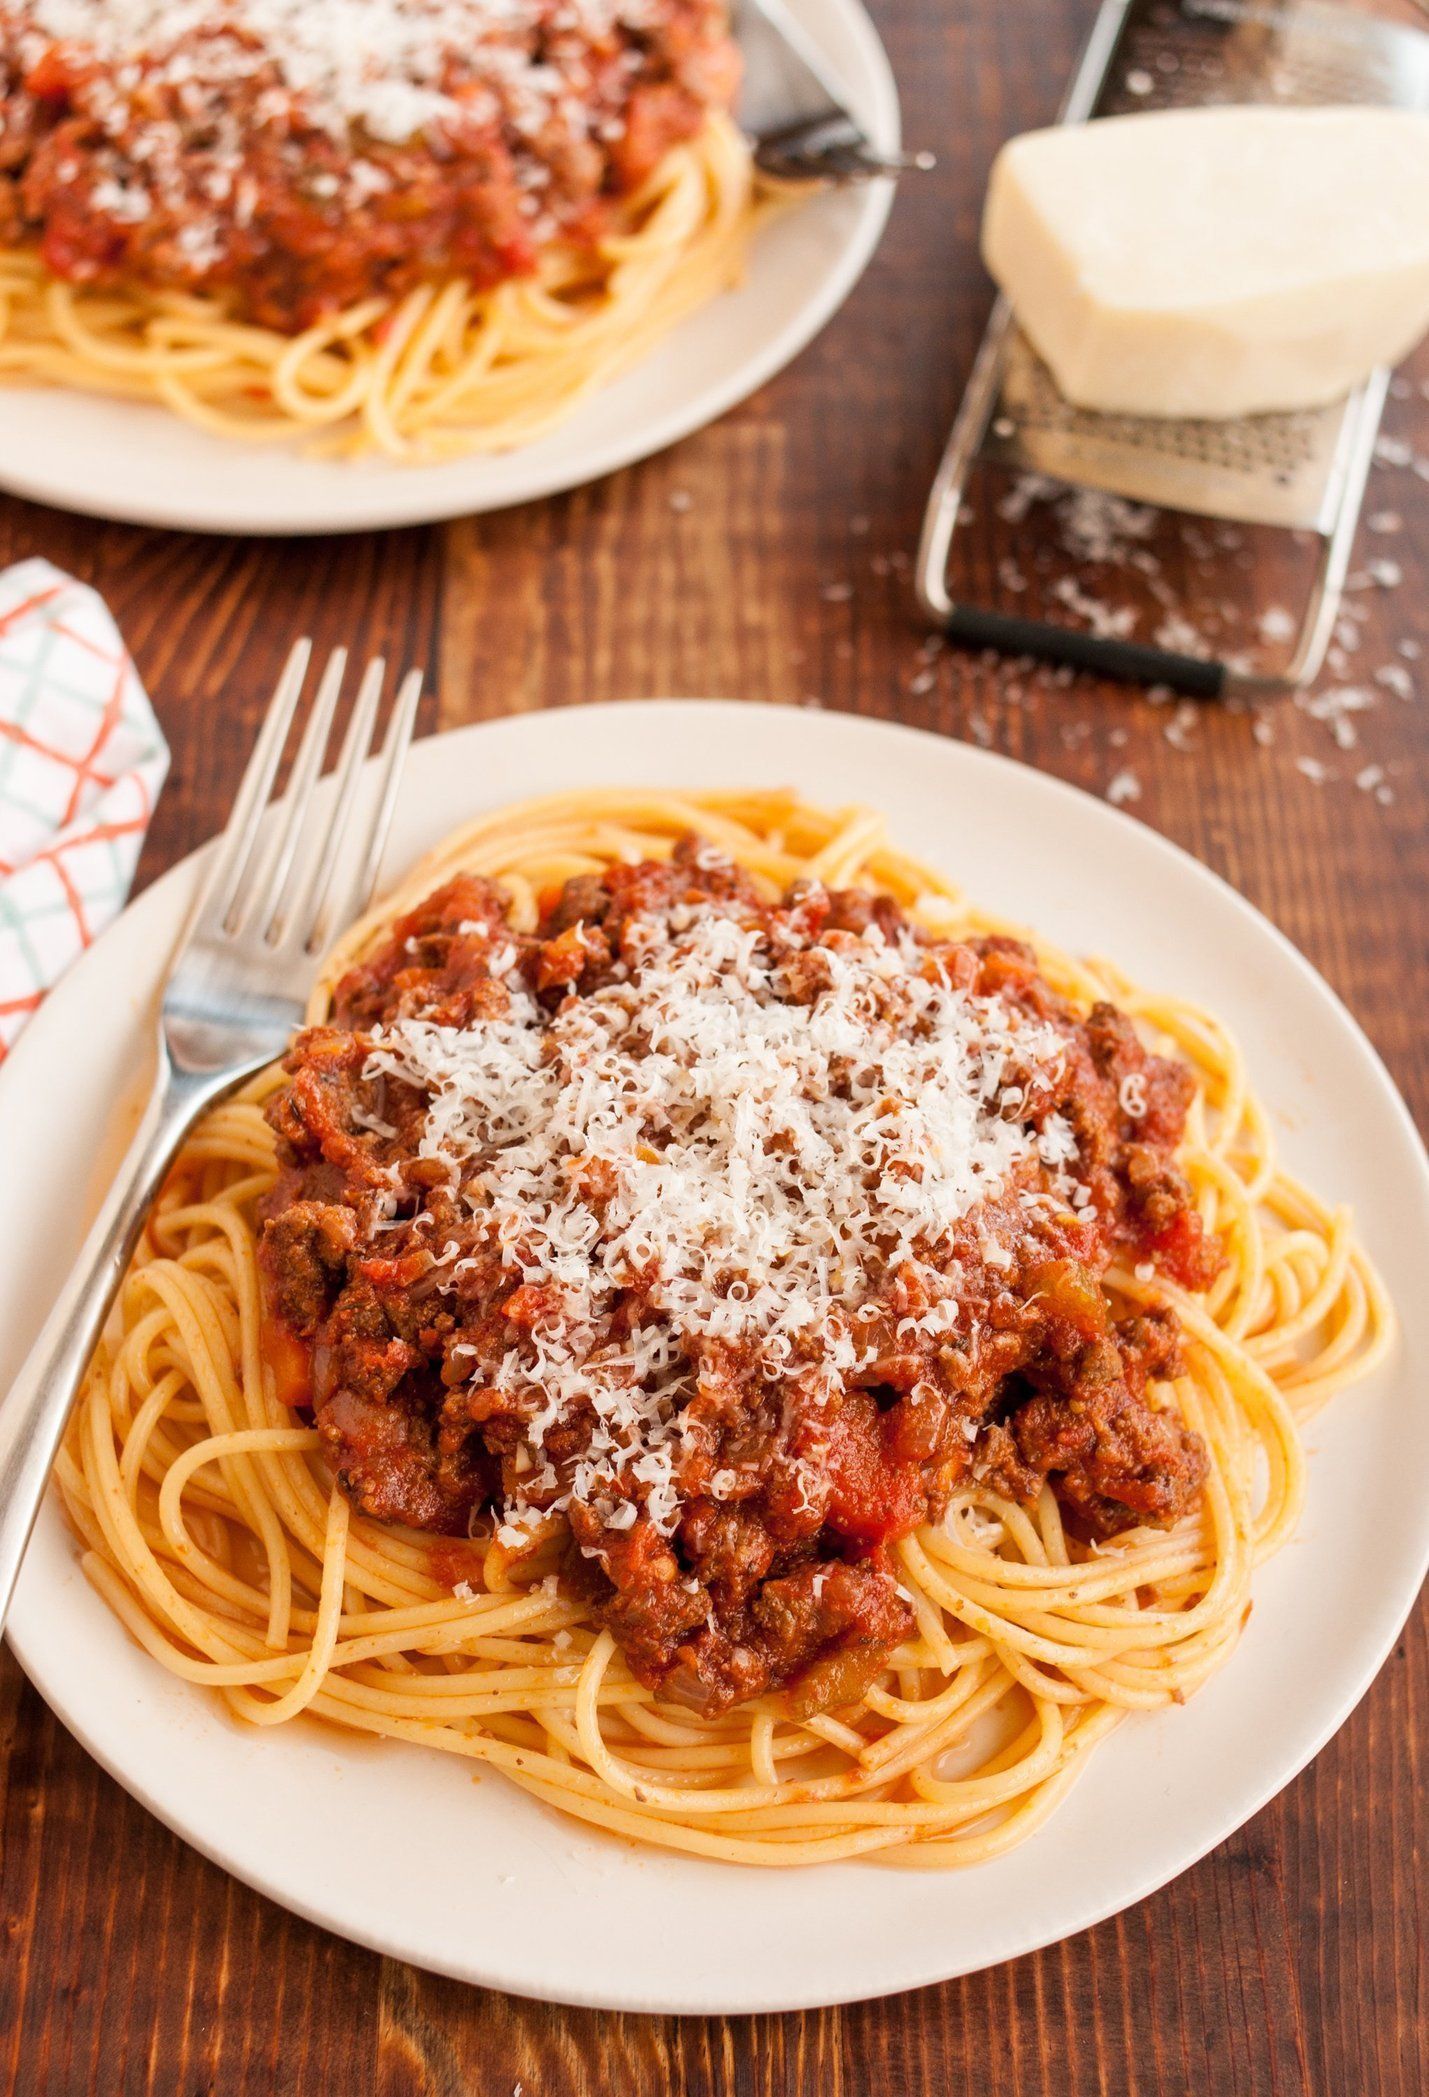 Making a good bolognese sauce is a real labor of love. Sure, you could just add some ground beef to a tomato sauce and call it